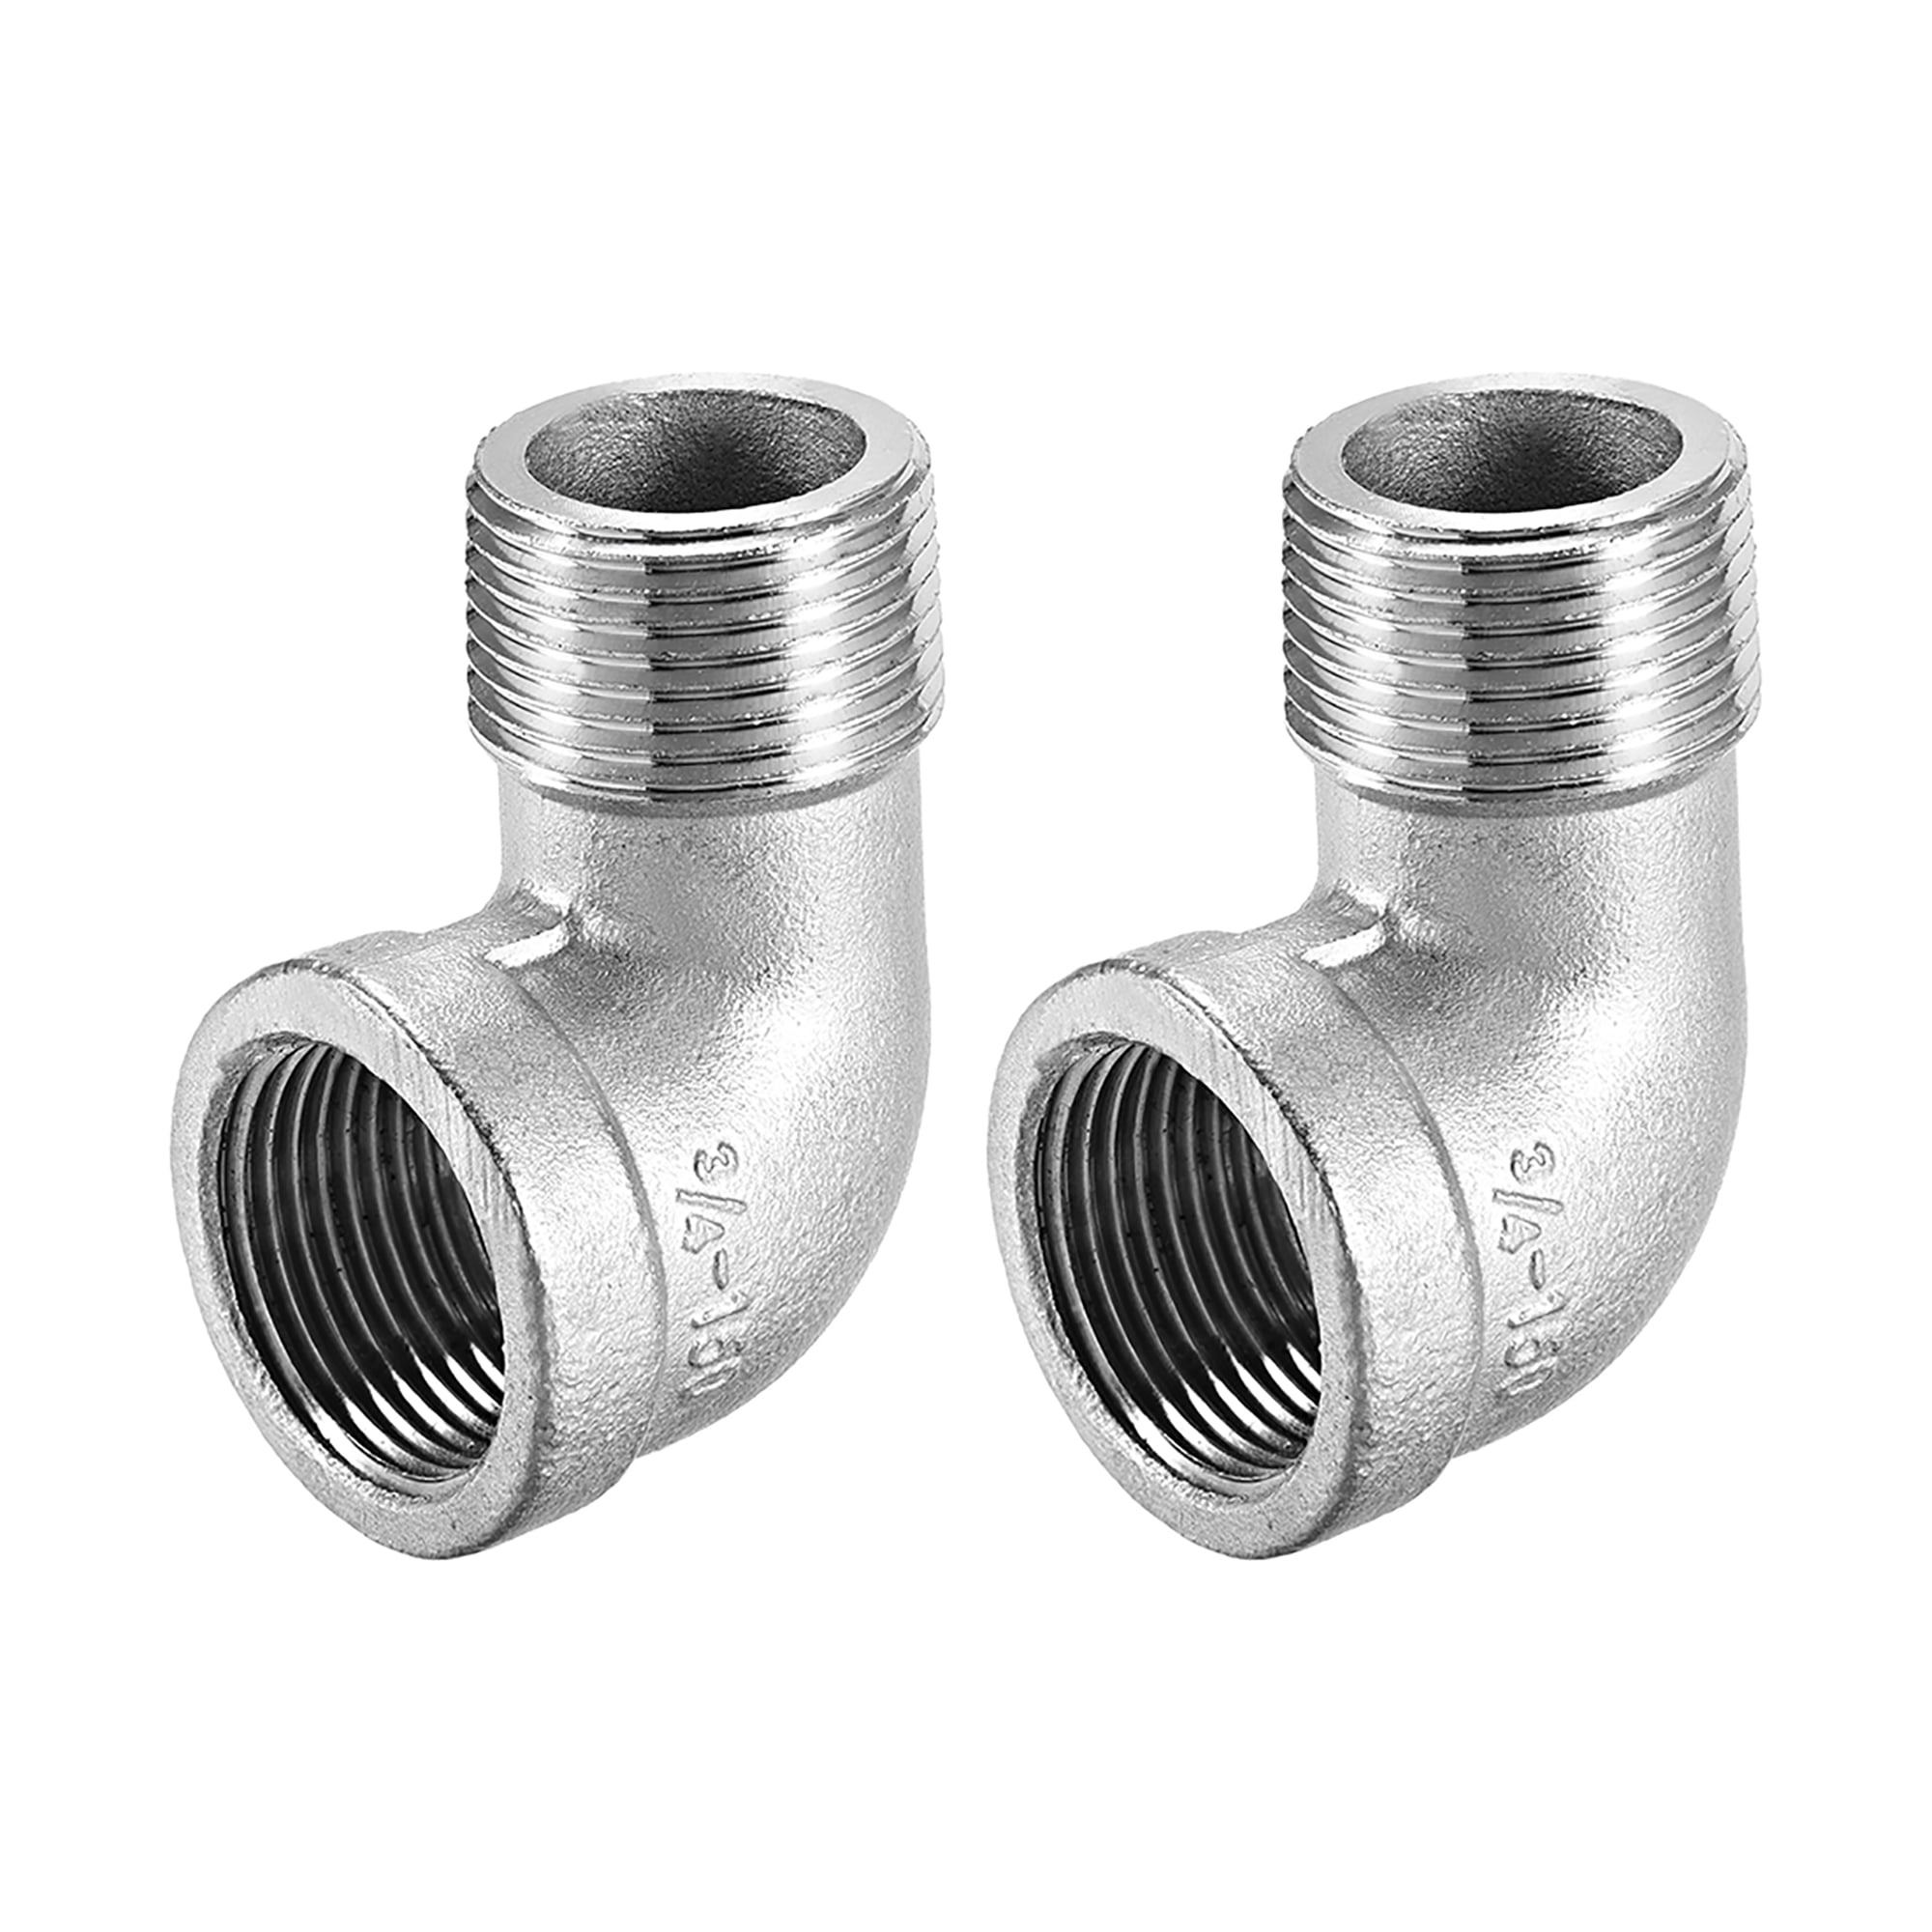 Stainless Steel 201 Cast Pipe Fittings 90 Degree Elbow 3 4 Bspt Female